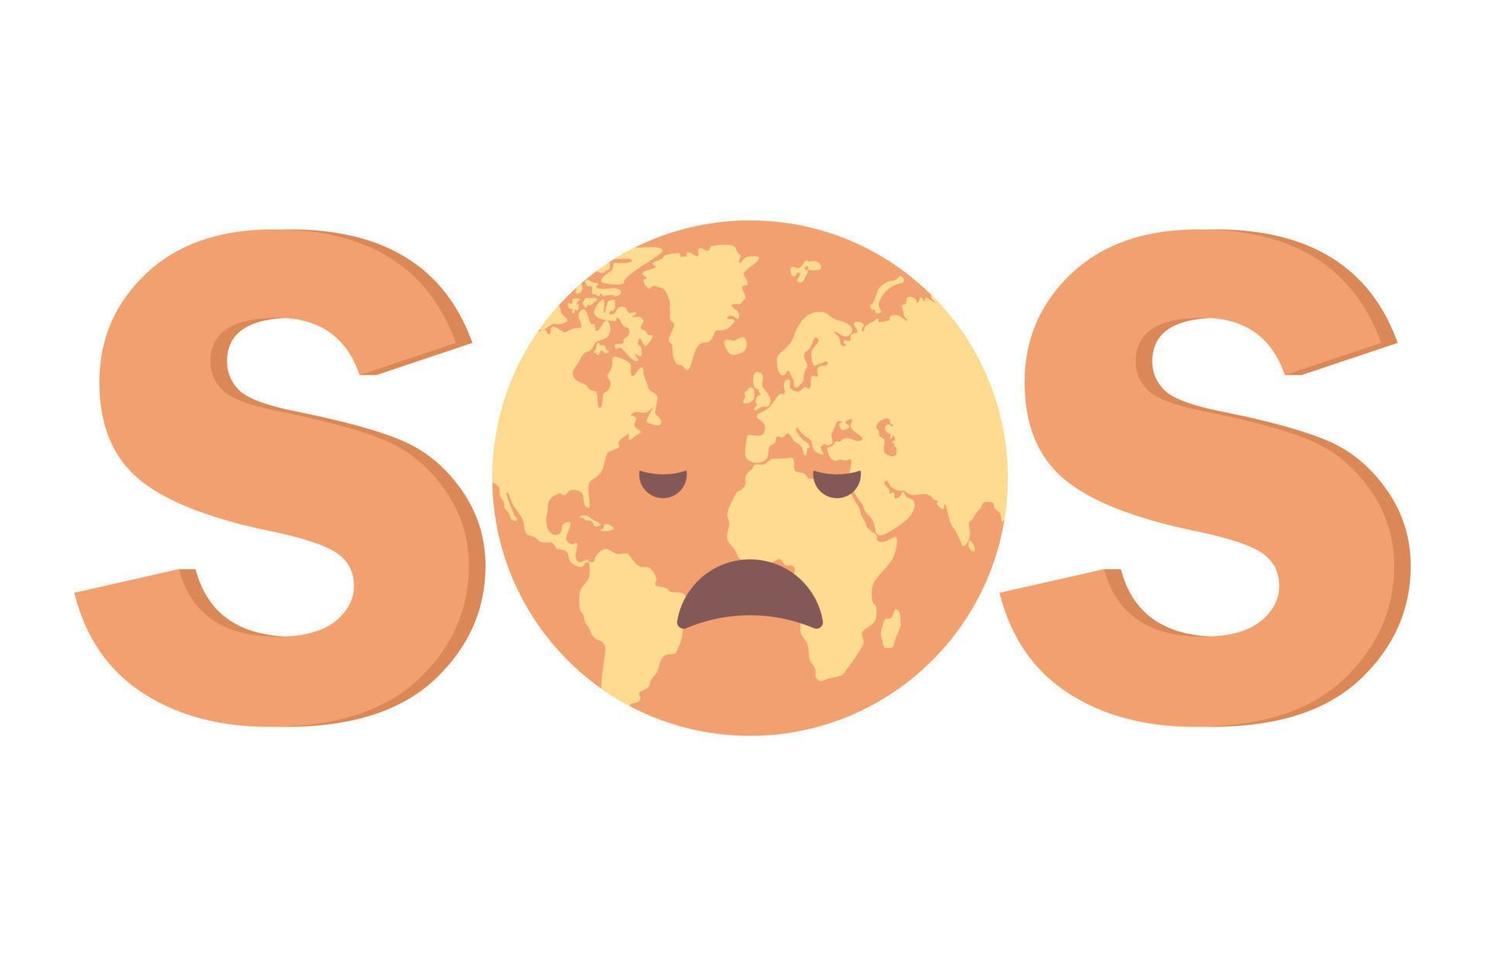 SOS text with Planet Earth. Climate change. Global warming concept. Save world. Ecology hazards, air pollution. Vector flat illustration